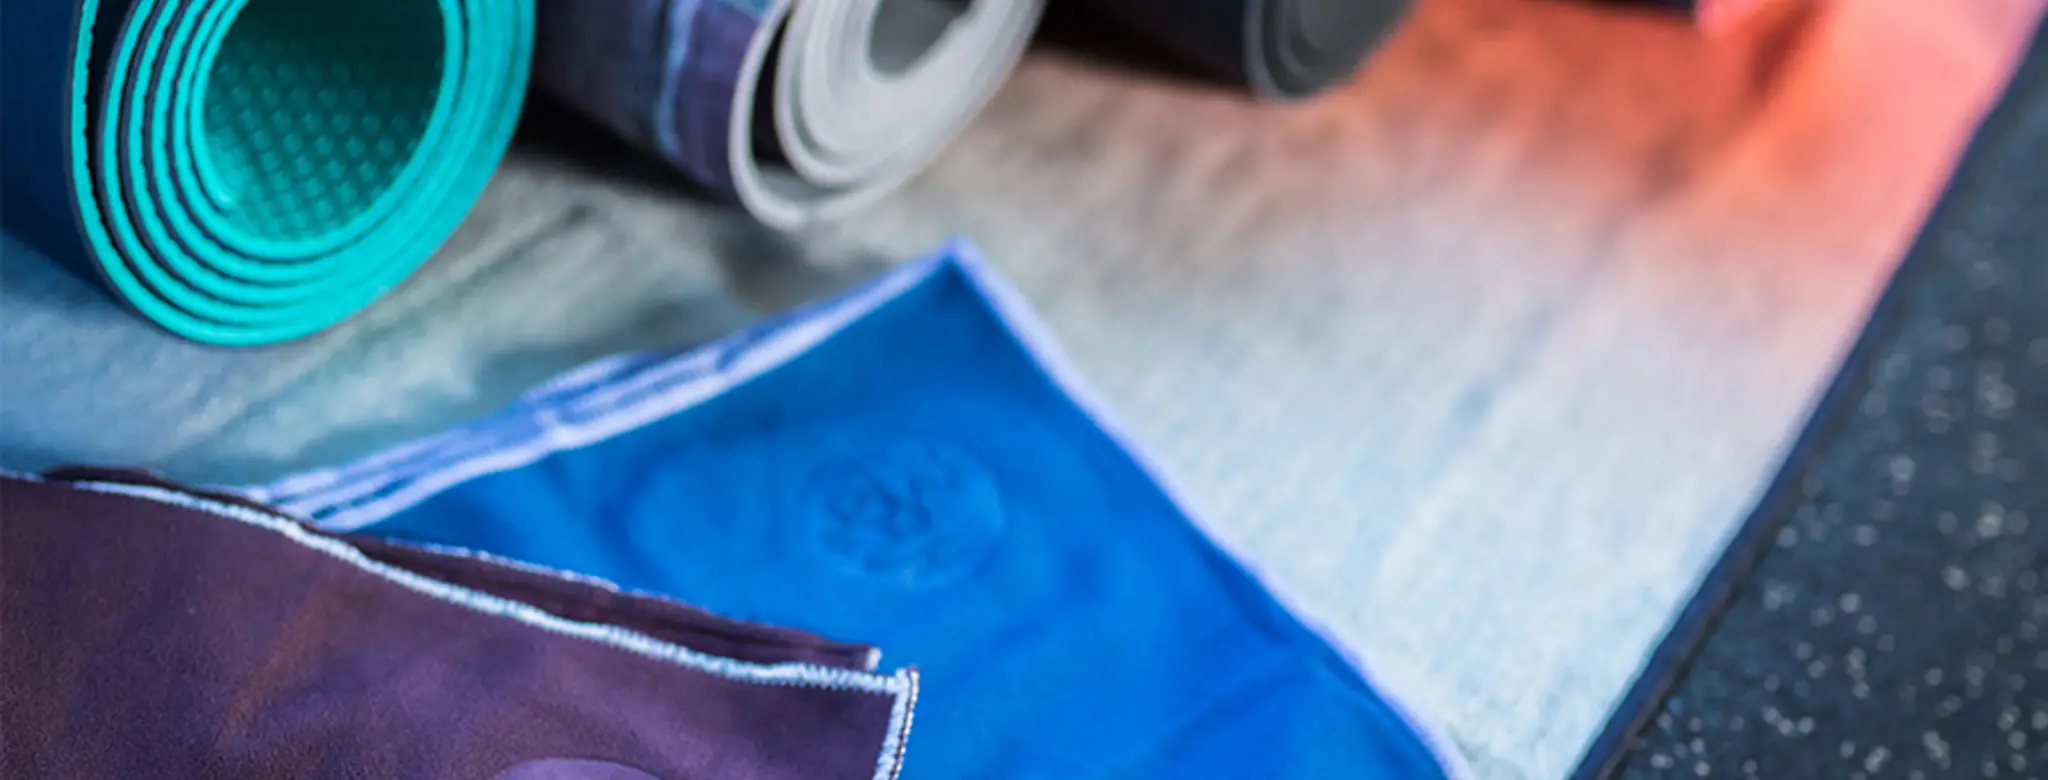 Manduka Products For Small Business Saturday